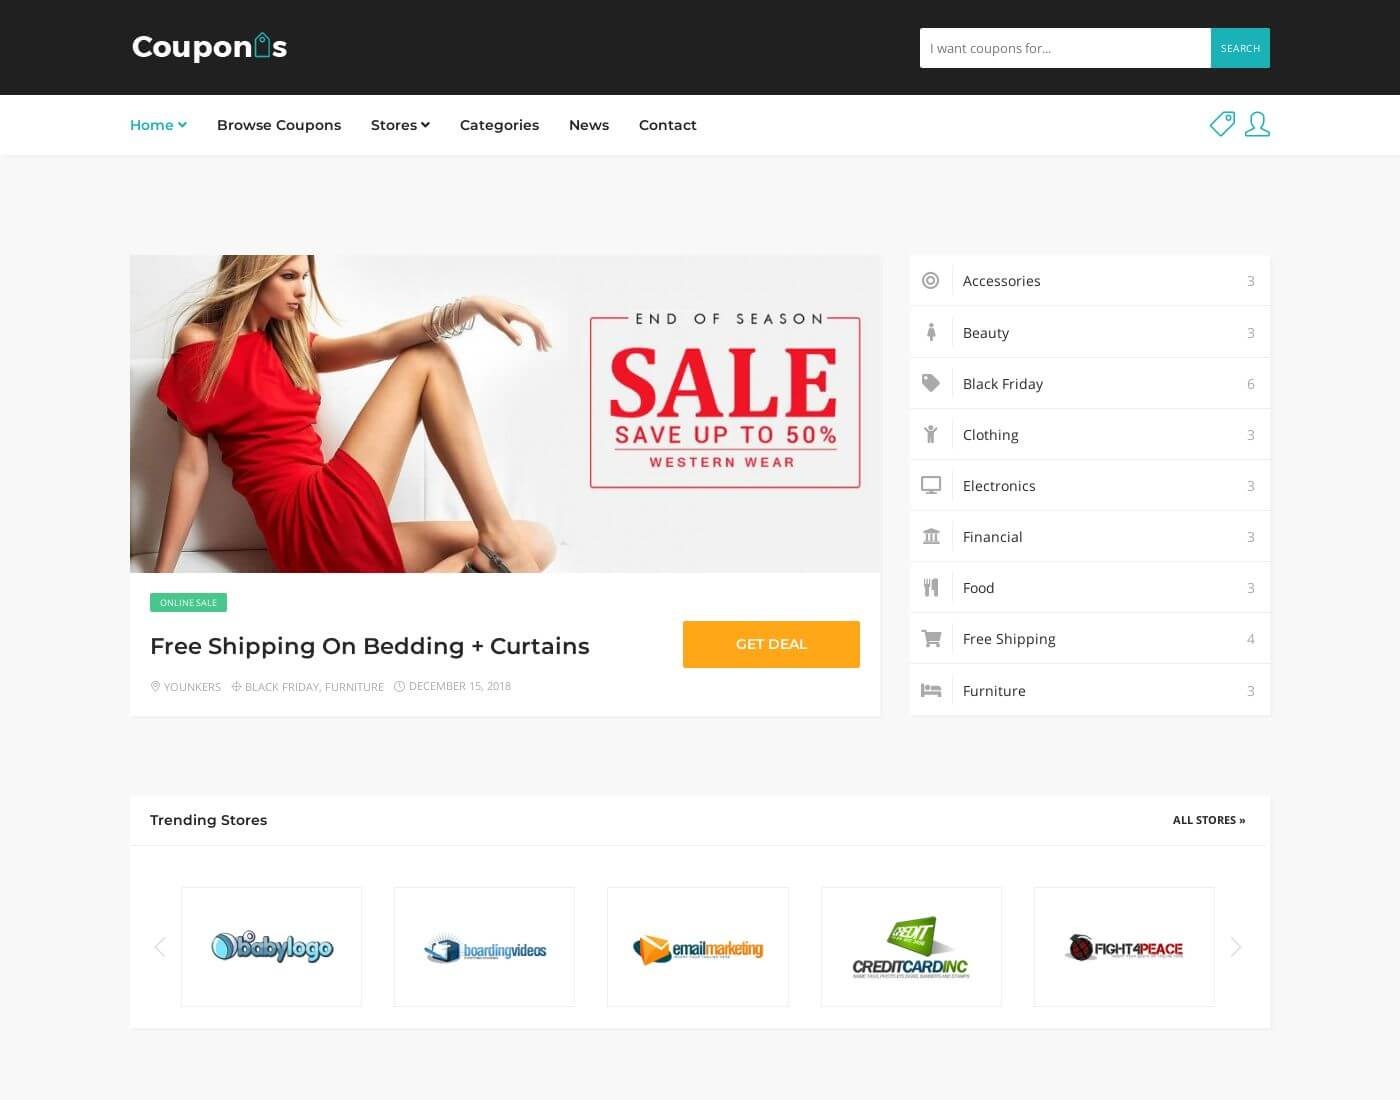 10+ Best WordPress Coupon Themes 2018 – Famethemes - Free Printable Coupons Without Downloading Or Registering